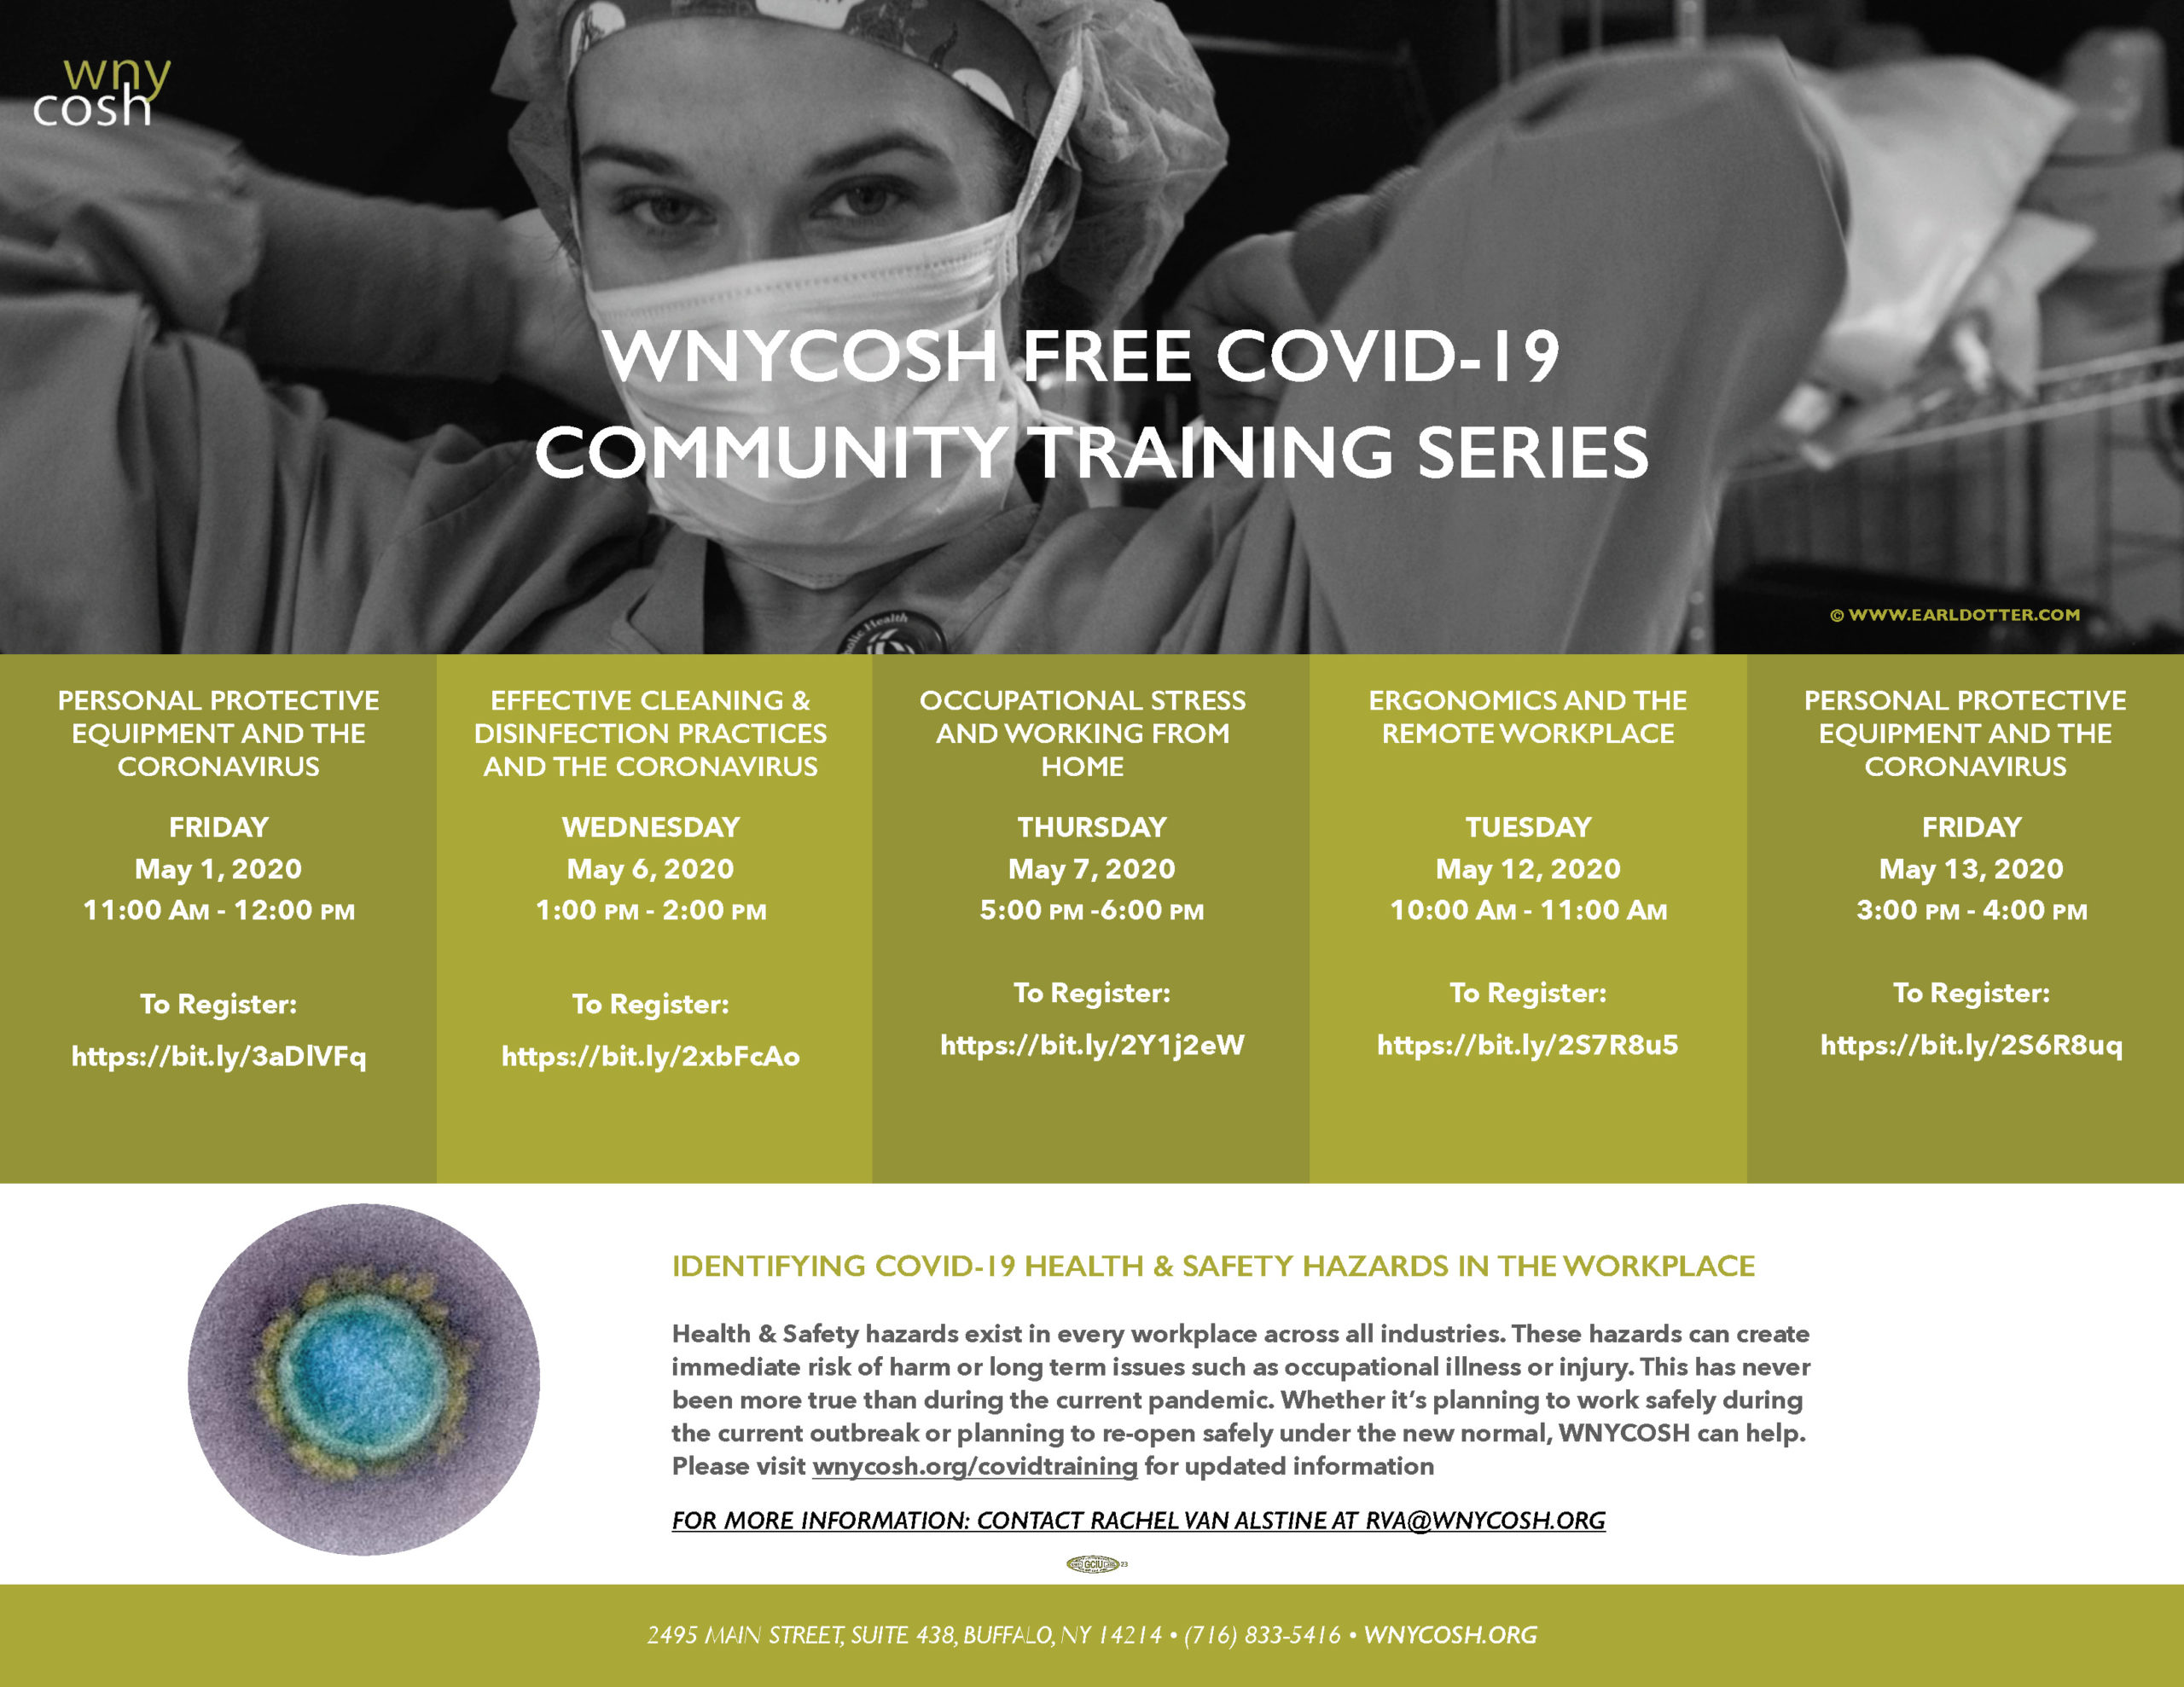 Flyer for COVID-19 trainings offered by WNYCOSH in May 2020. Trainings include using personal protective equipment, proper cleaning and disinfection, home workplace stress, and home ergonomics.